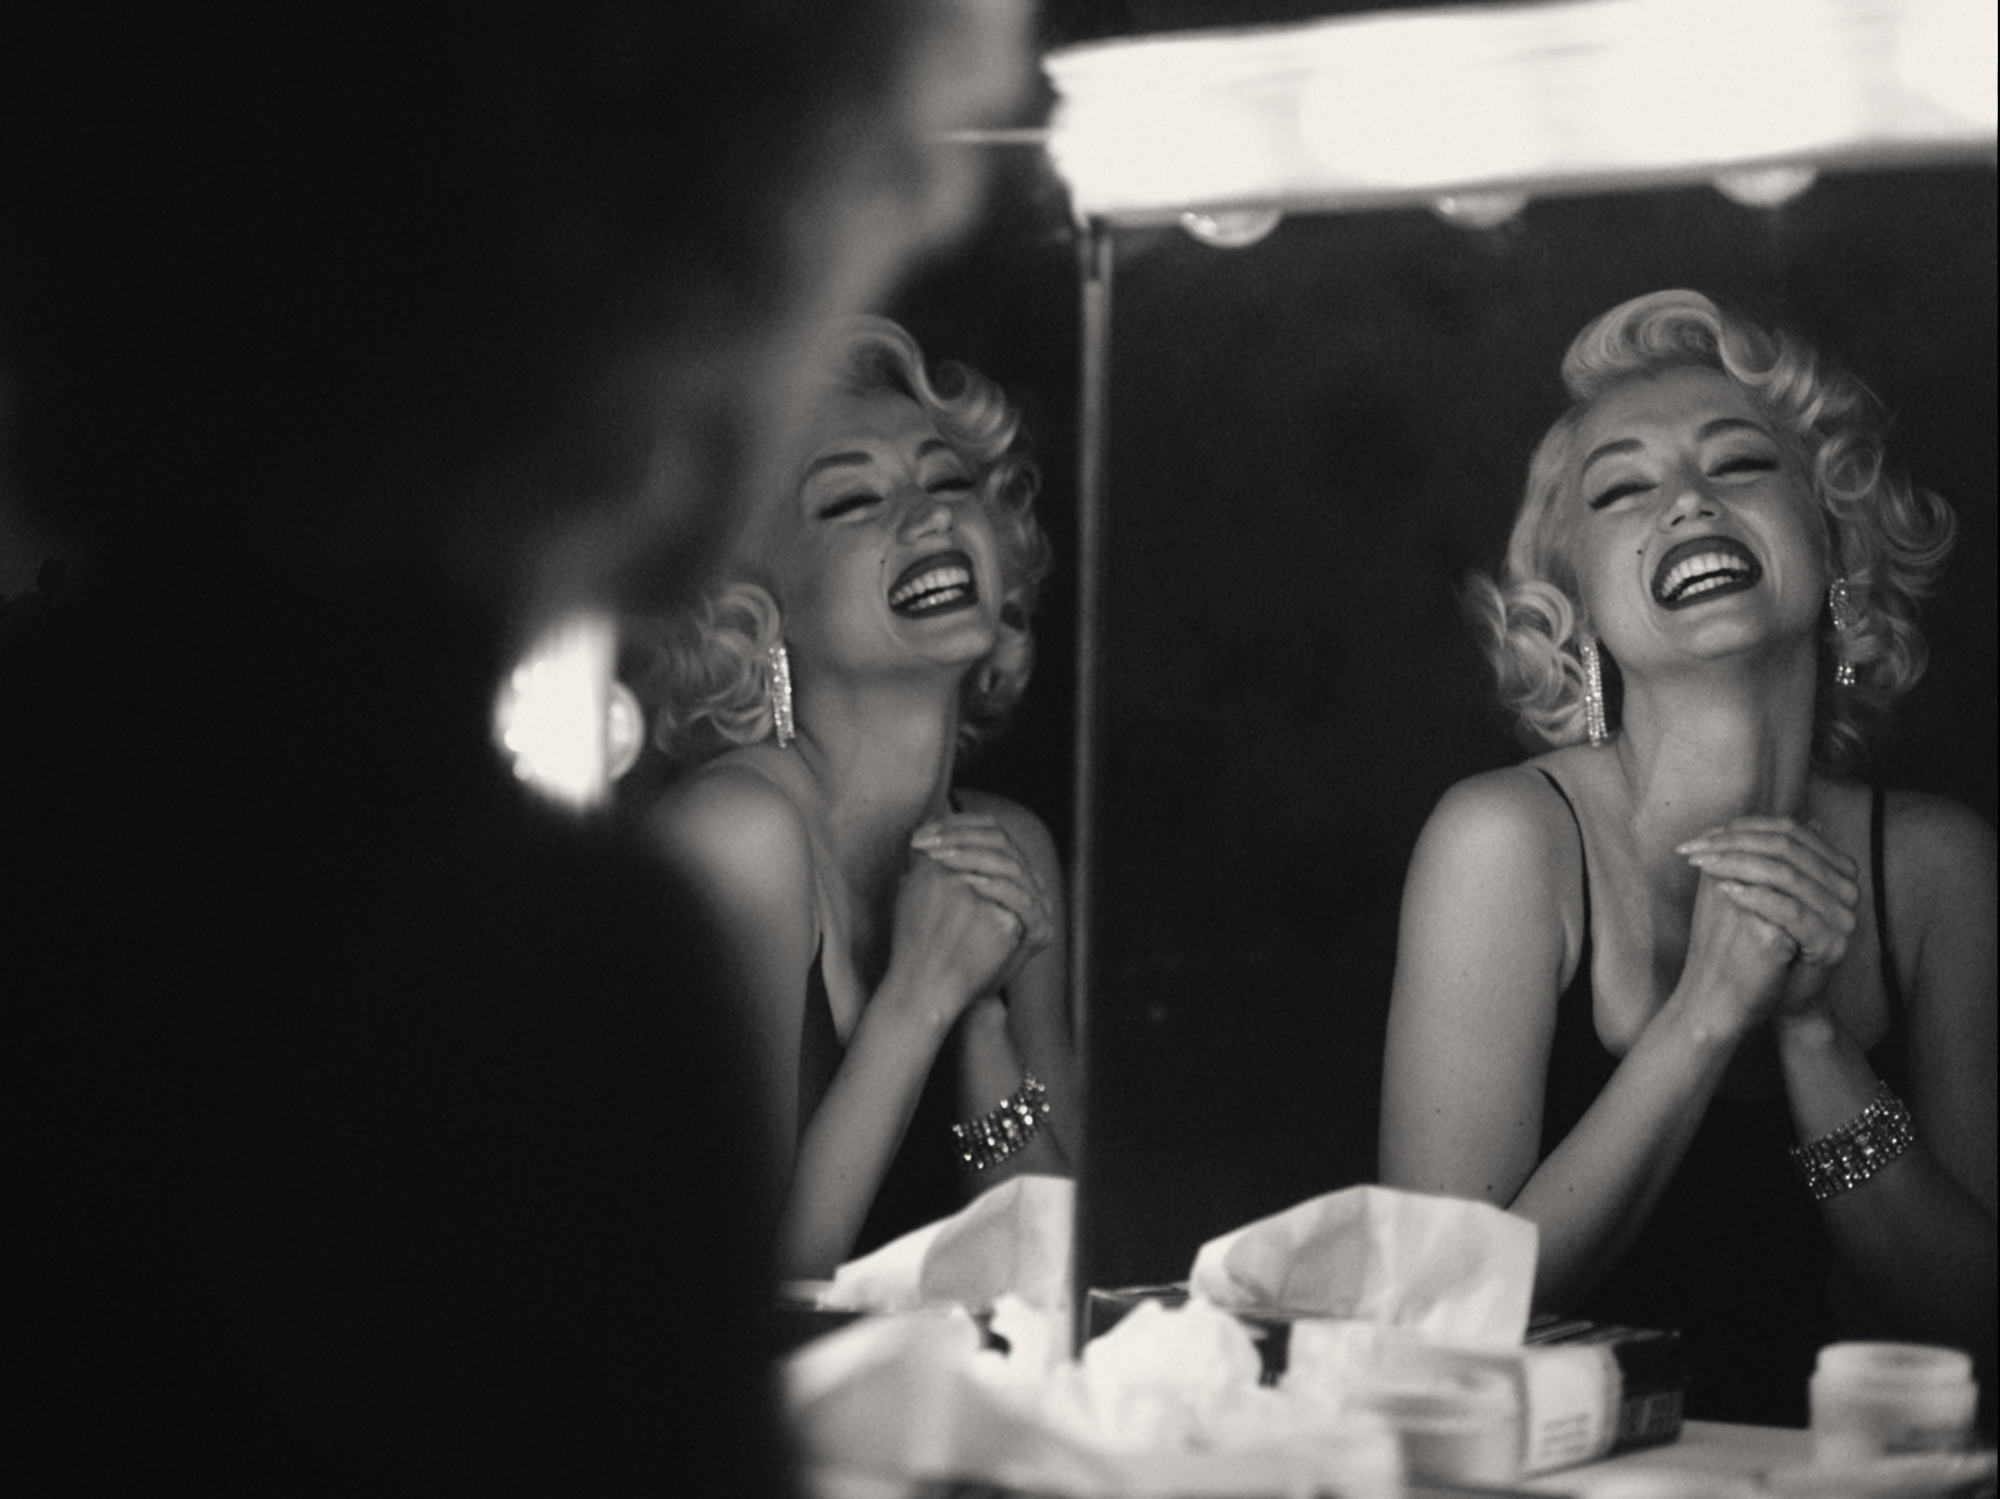 'Blonde' Ana de Armas as Marilyn Monroe in black-and-white picture smiling at herself in the mirror